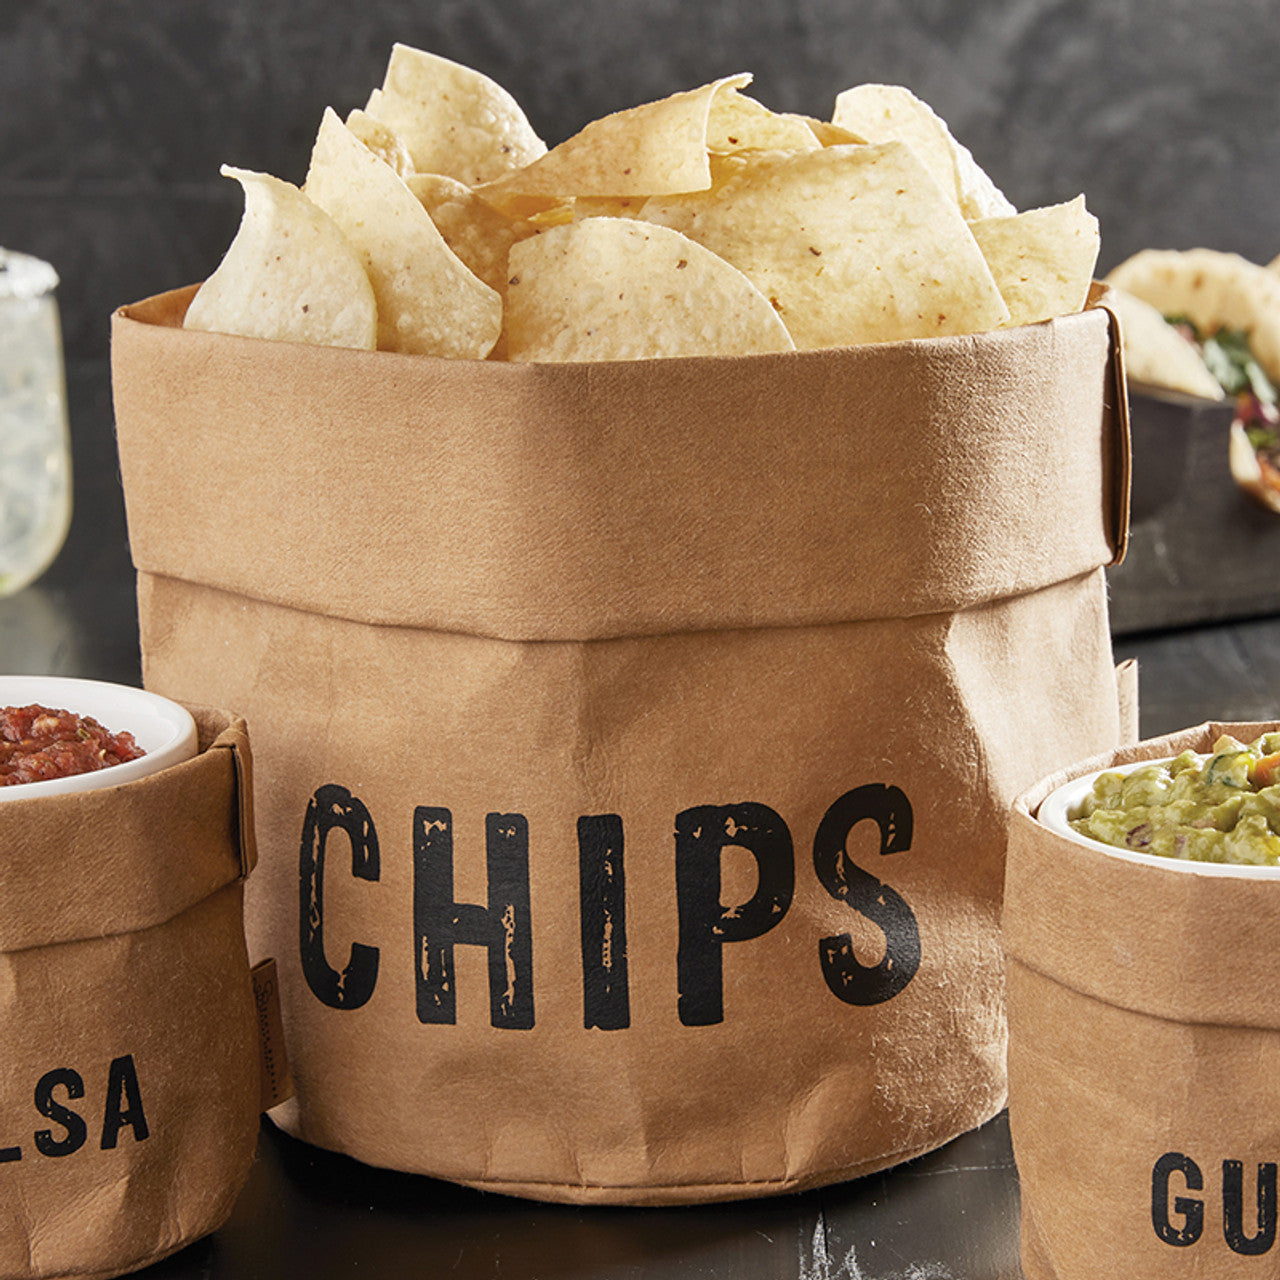 Chips Salsa & Guac 5 Piece Set | Washable Paper Holders and Ceramic Dip Cups Box Set